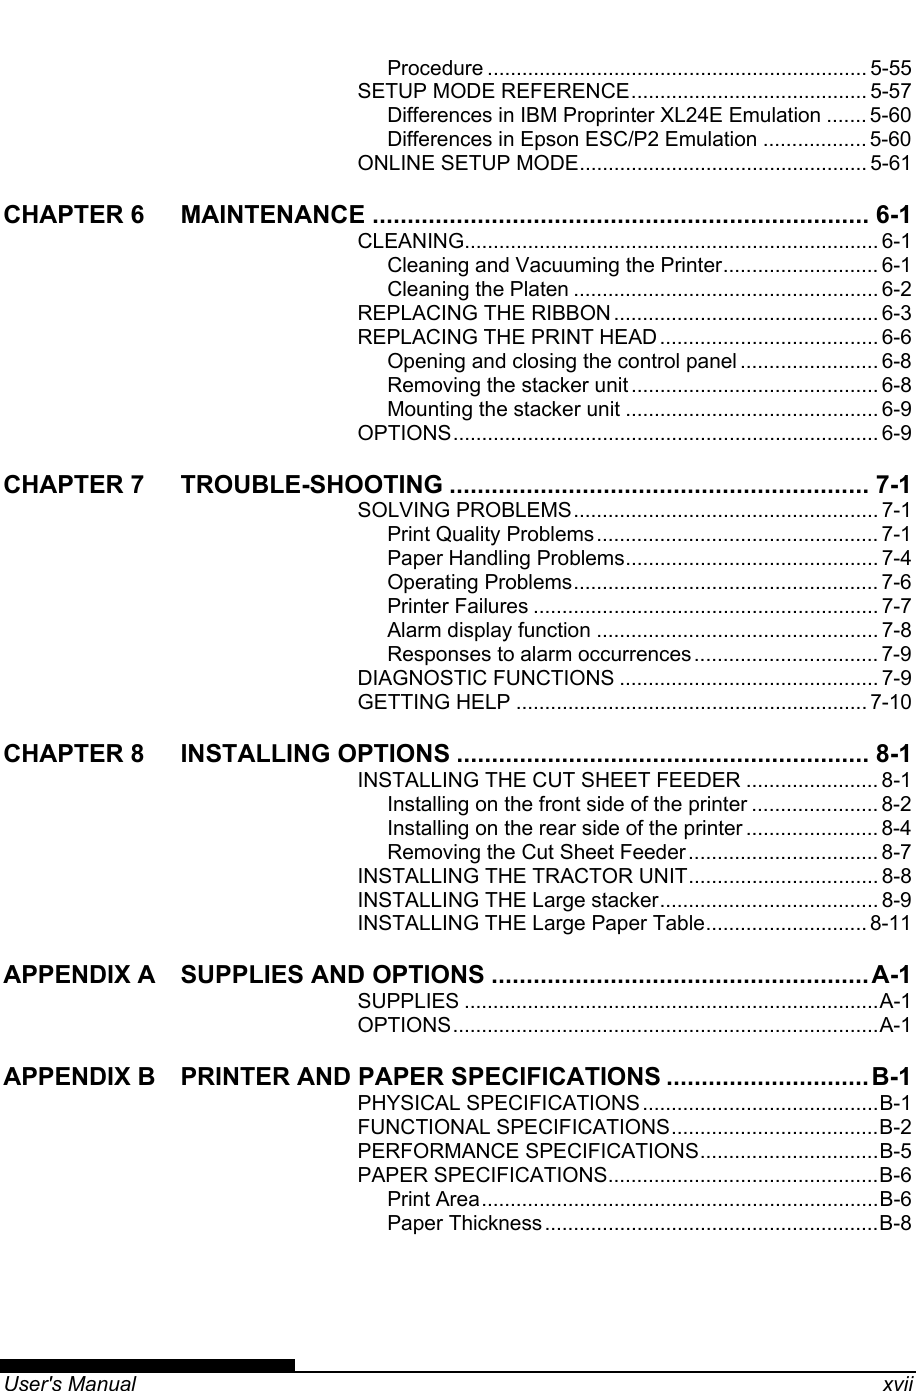   User&apos;s Manual    xvii Procedure .................................................................. 5-55 SETUP MODE REFERENCE......................................... 5-57 Differences in IBM Proprinter XL24E Emulation ....... 5-60 Differences in Epson ESC/P2 Emulation .................. 5-60 ONLINE SETUP MODE.................................................. 5-61 CHAPTER 6 MAINTENANCE ....................................................................... 6-1 CLEANING........................................................................ 6-1 Cleaning and Vacuuming the Printer........................... 6-1 Cleaning the Platen ..................................................... 6-2 REPLACING THE RIBBON .............................................. 6-3 REPLACING THE PRINT HEAD ...................................... 6-6 Opening and closing the control panel ........................ 6-8 Removing the stacker unit ........................................... 6-8 Mounting the stacker unit ............................................ 6-9 OPTIONS.......................................................................... 6-9 CHAPTER 7 TROUBLE-SHOOTING ............................................................ 7-1 SOLVING PROBLEMS..................................................... 7-1 Print Quality Problems................................................. 7-1 Paper Handling Problems............................................ 7-4 Operating Problems..................................................... 7-6 Printer Failures ............................................................ 7-7 Alarm display function ................................................. 7-8 Responses to alarm occurrences ................................ 7-9 DIAGNOSTIC FUNCTIONS ............................................. 7-9 GETTING HELP ............................................................. 7-10 CHAPTER 8 INSTALLING OPTIONS ........................................................... 8-1 INSTALLING THE CUT SHEET FEEDER ....................... 8-1 Installing on the front side of the printer ...................... 8-2 Installing on the rear side of the printer ....................... 8-4 Removing the Cut Sheet Feeder ................................. 8-7 INSTALLING THE TRACTOR UNIT................................. 8-8 INSTALLING THE Large stacker...................................... 8-9 INSTALLING THE Large Paper Table............................ 8-11 APPENDIX A SUPPLIES AND OPTIONS ......................................................A-1 SUPPLIES ........................................................................A-1 OPTIONS..........................................................................A-1 APPENDIX B PRINTER AND PAPER SPECIFICATIONS .............................B-1 PHYSICAL SPECIFICATIONS.........................................B-1 FUNCTIONAL SPECIFICATIONS....................................B-2 PERFORMANCE SPECIFICATIONS...............................B-5 PAPER SPECIFICATIONS...............................................B-6 Print Area.....................................................................B-6 Paper Thickness..........................................................B-8  